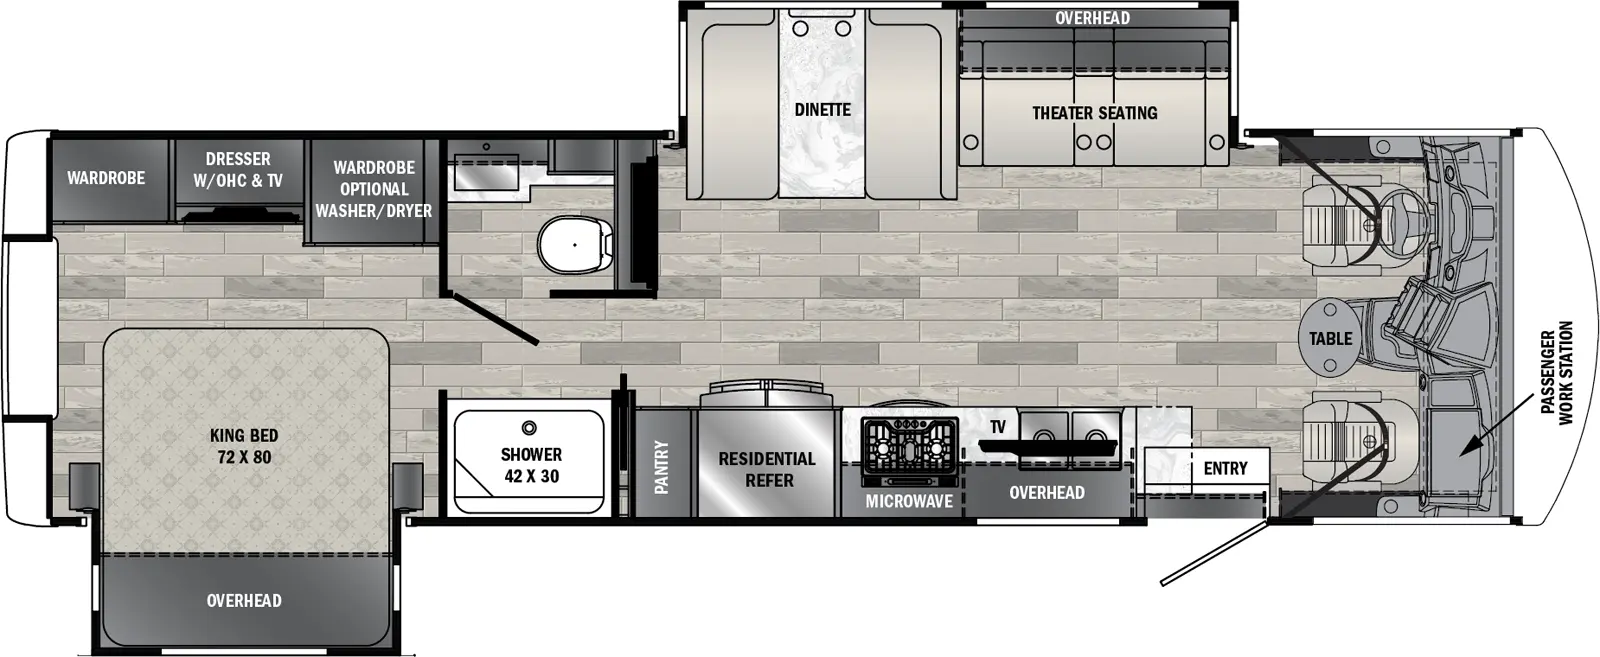 The 31Xy has two slideouts and one entry. Floorplan layout front to back: front cockpit with driver and passenger seat, passenger workstation and center table; off-door side slideout with theater seating with overhead cabinet, and dinette; door side entry, kitchen counter with sink, overhead cabinet, TV, microwave, cooktop, residential refrigerator, and pantry; split full pass through bathroom; rear bedroom with door side king bed slideout with overhead cabinet, and off-door side dresser with overhead cabinet and TV with wardrobes on each side and optional washer/dryer.